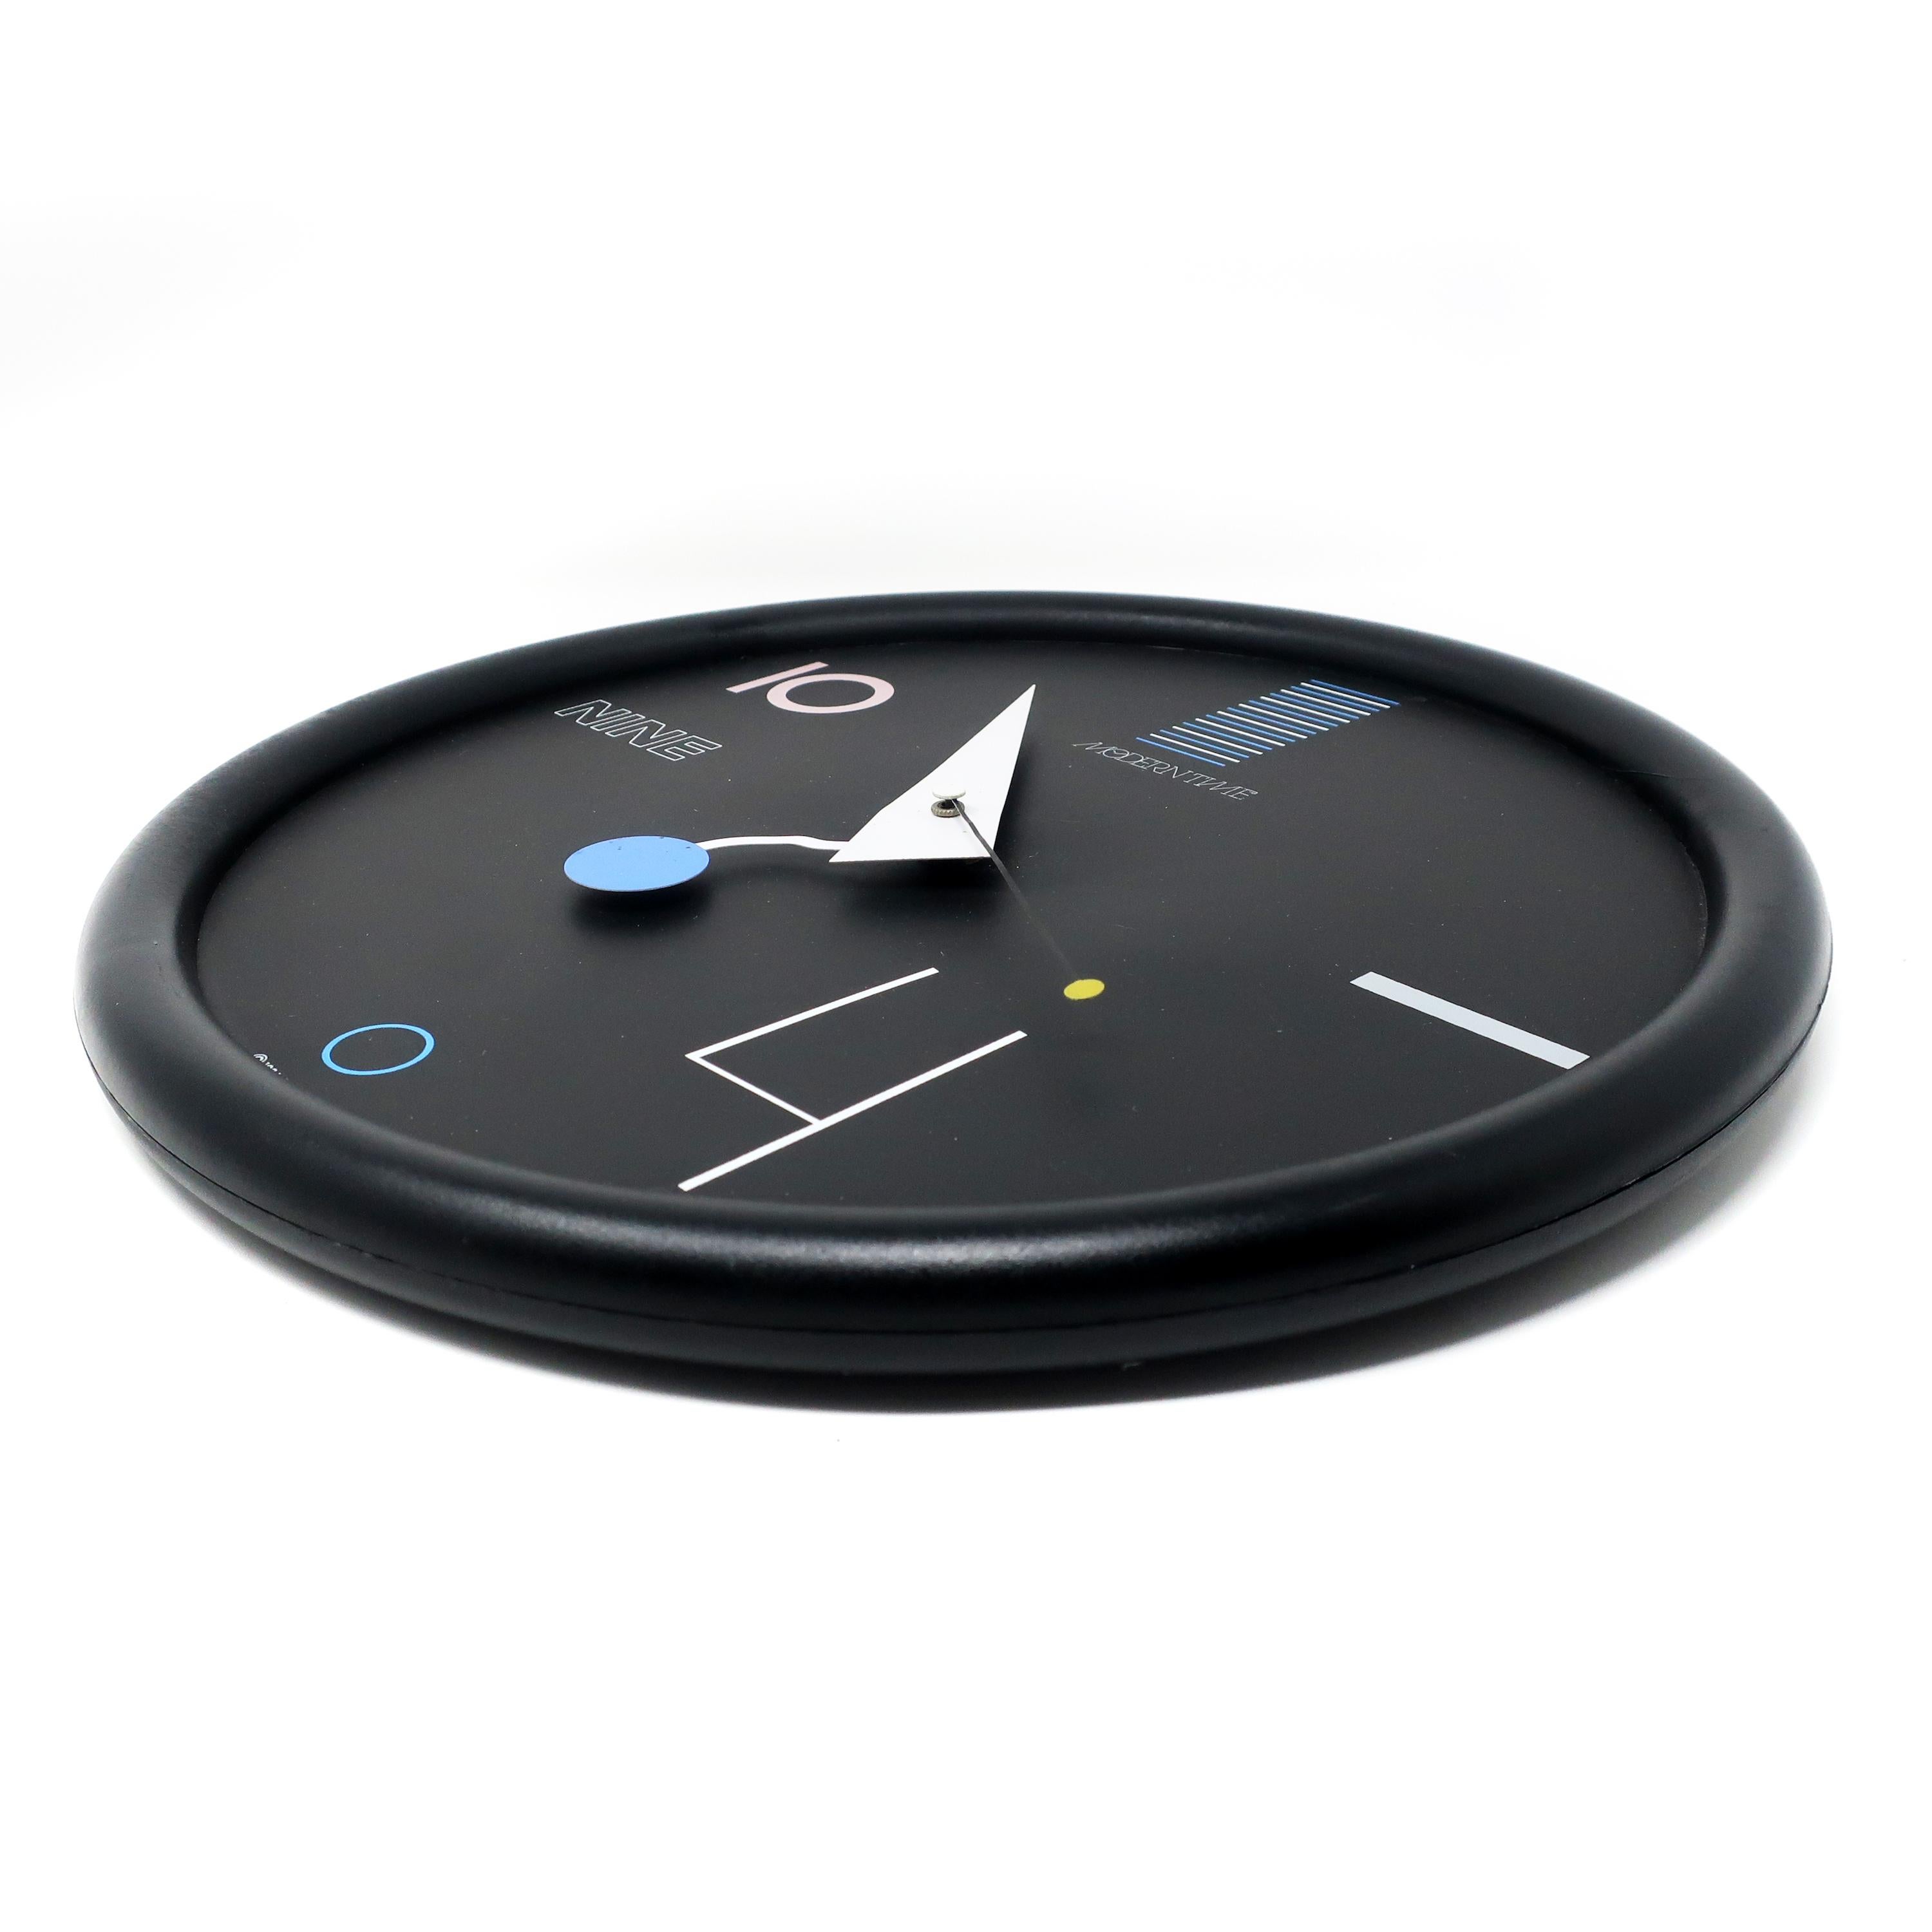 A stunning postmodern wall clock with multi-color accents from Canetti's Moderntime Collection. Black plastic frame, black face, and blue, white, black, and gray accents. It perfectly walks the line between understated & sophisticated and bright &